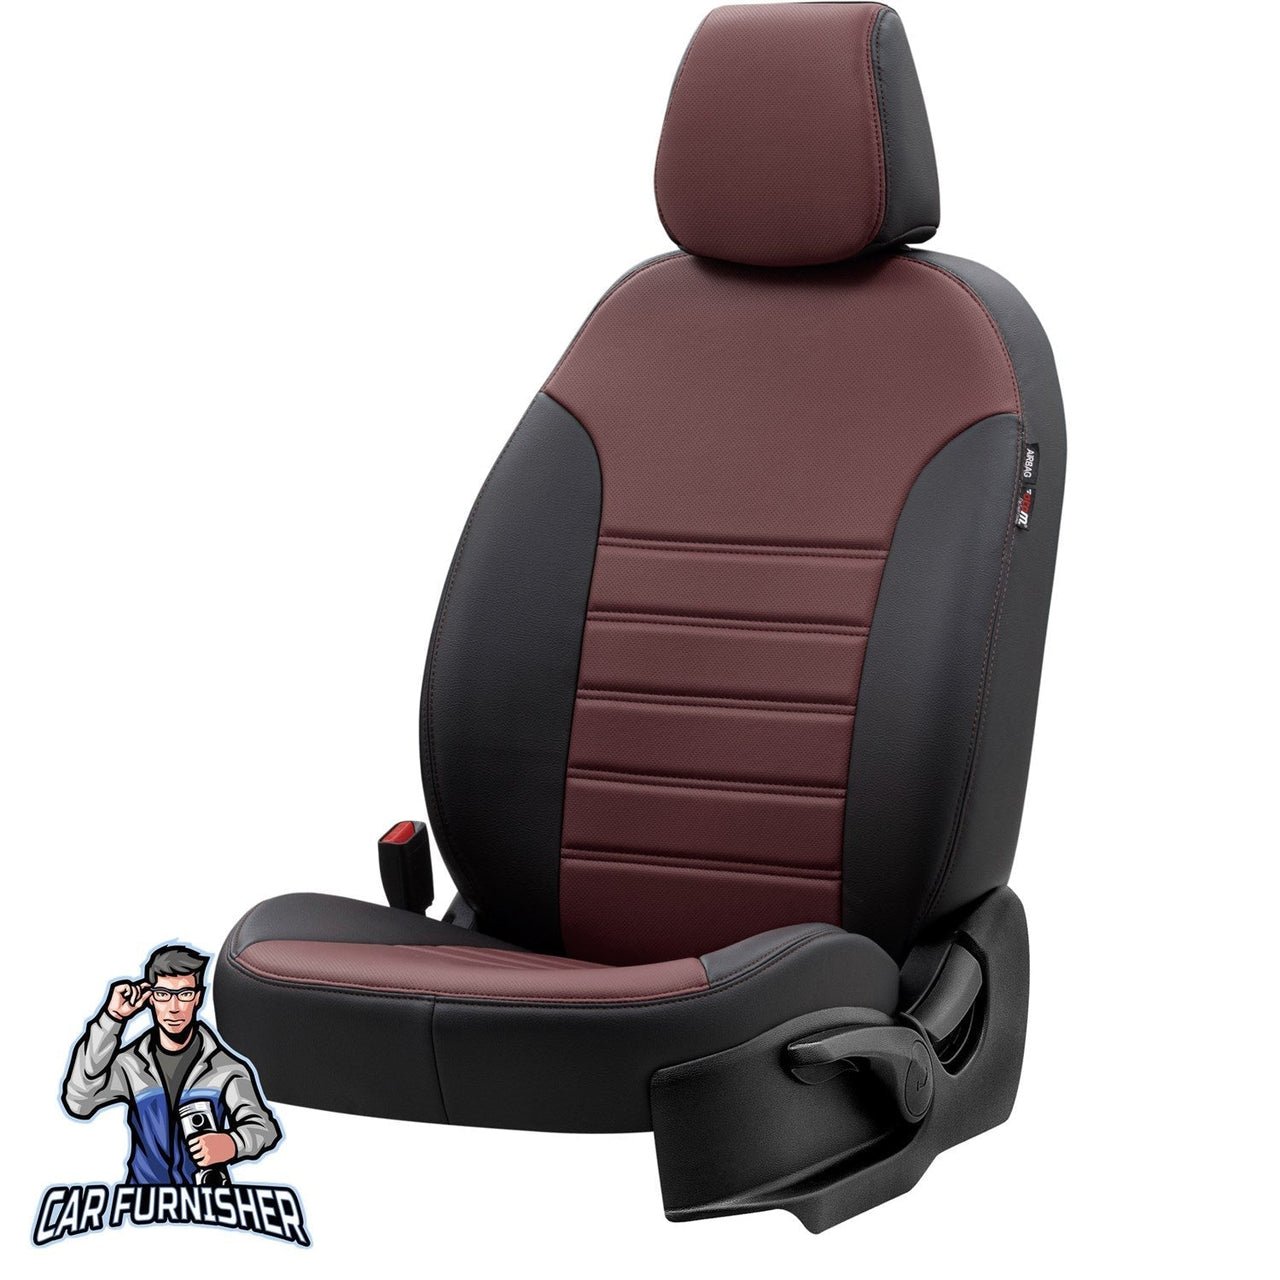 Chevrolet Spark Seat Covers Istanbul Leather Design Burgundy Leather